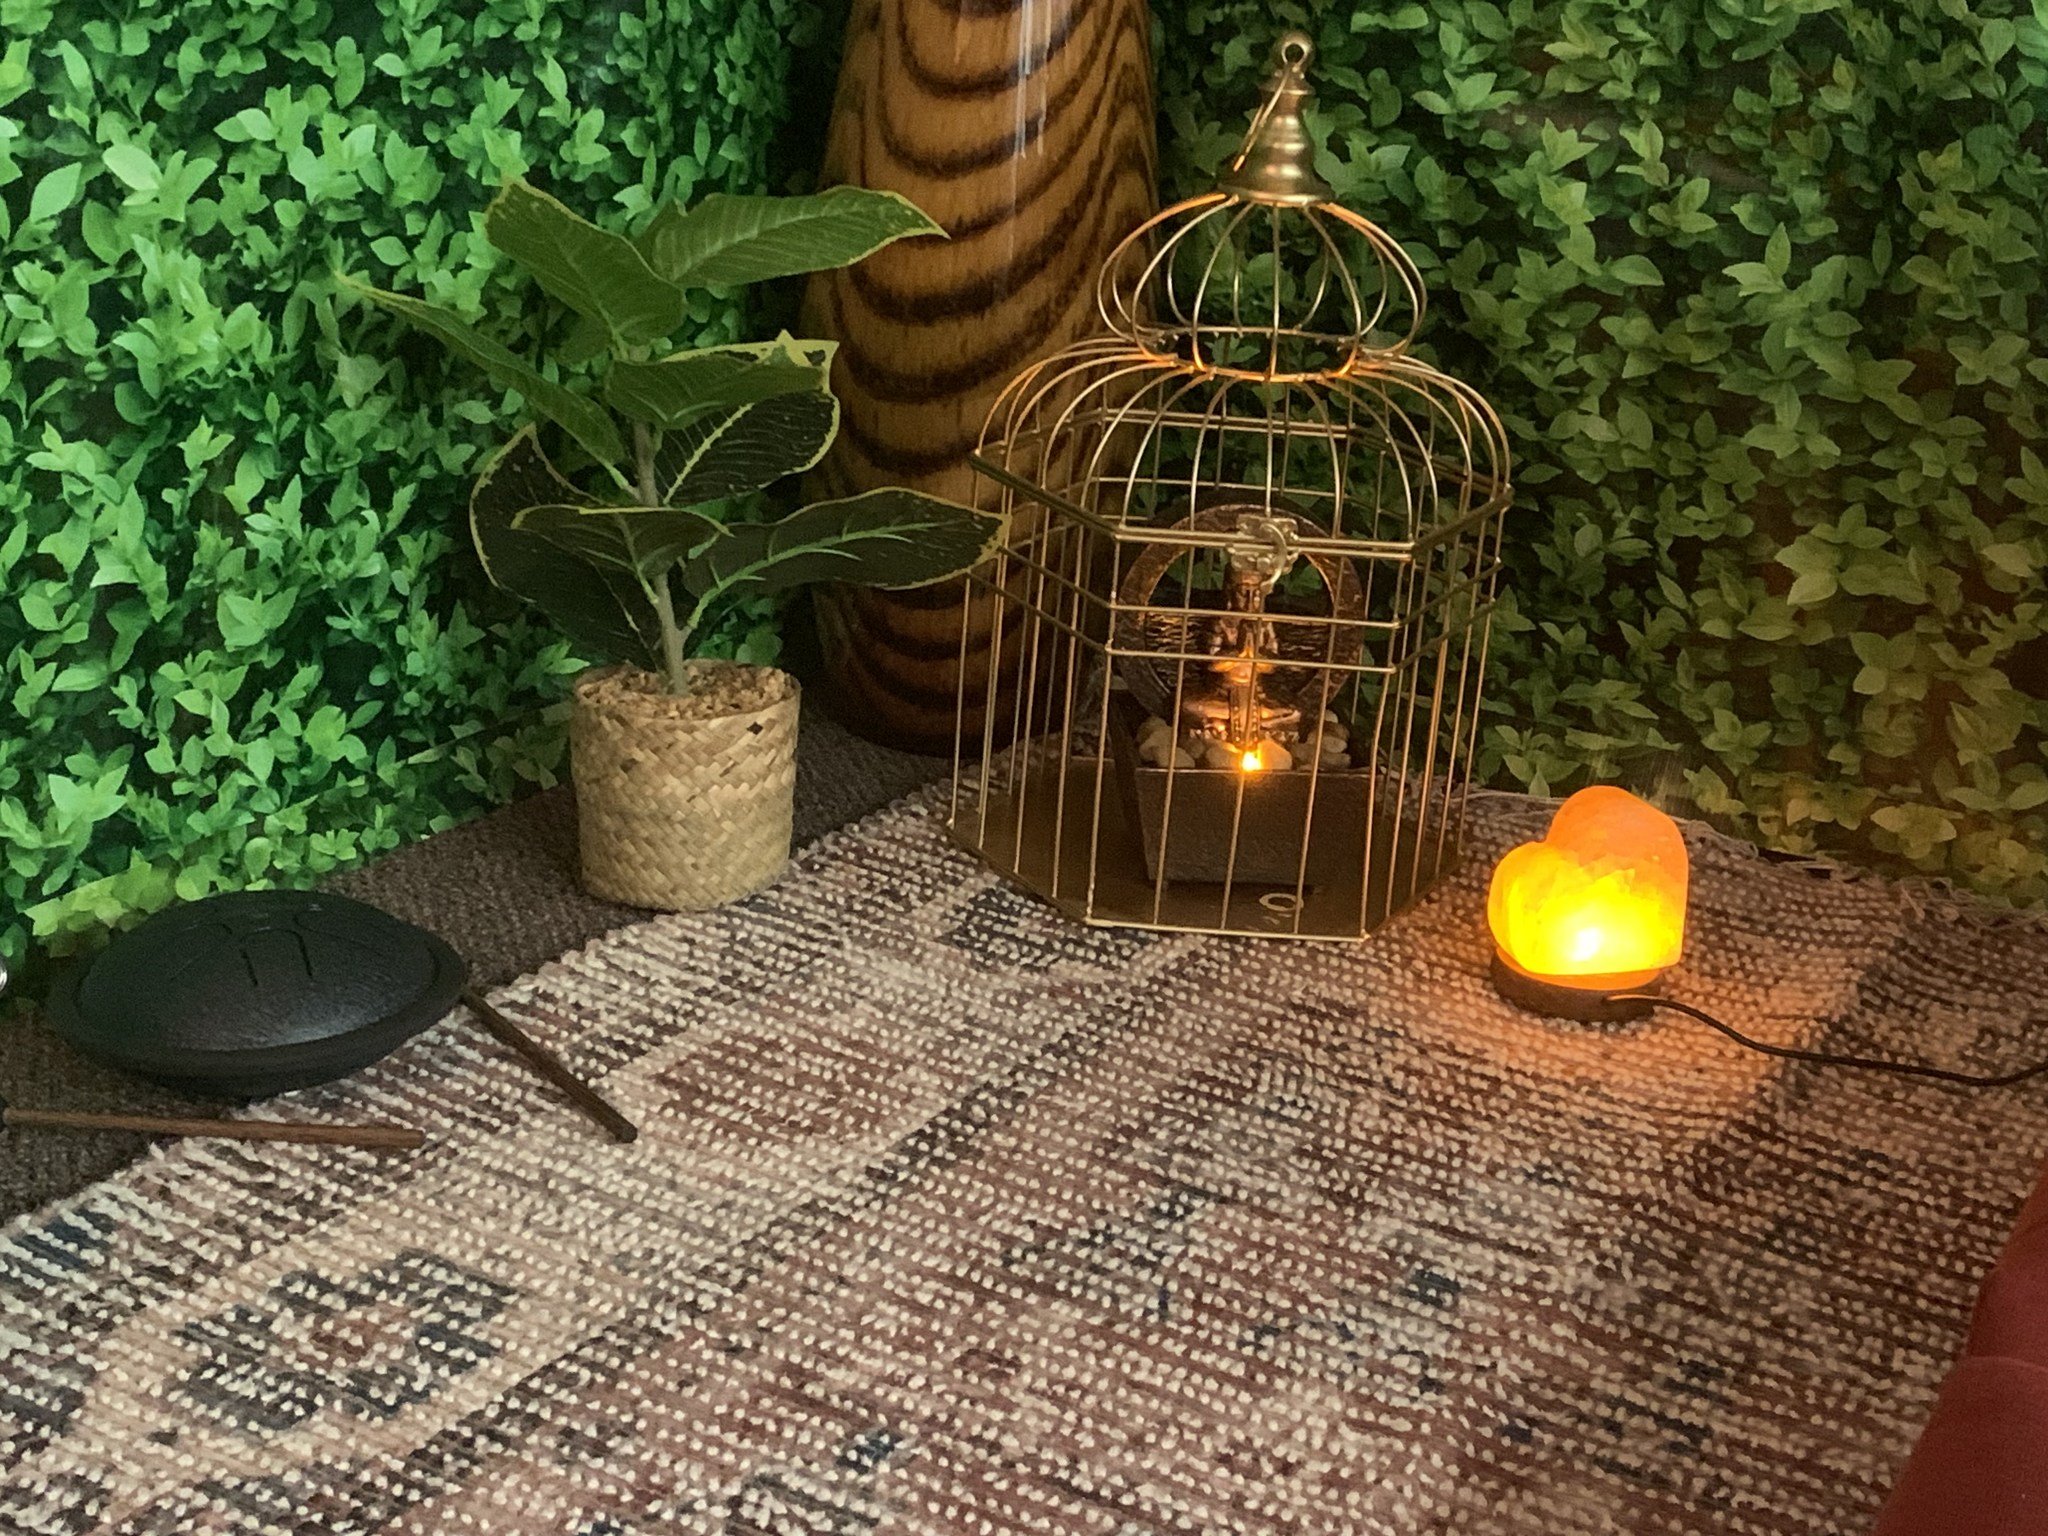 Don't miss your chance to experience the Pop-Up Zen Room!! Thanks to @chynadollt for assisting me and @luxury_sai for helping with the finishing touches🤎💪🏾 Book your time in the #zenroom🧘🏾&zwj;♀️🧘&zwj;♂️🧘🏾&zwj;♂️🧘🏻&zwj;♀️ by clicking the li